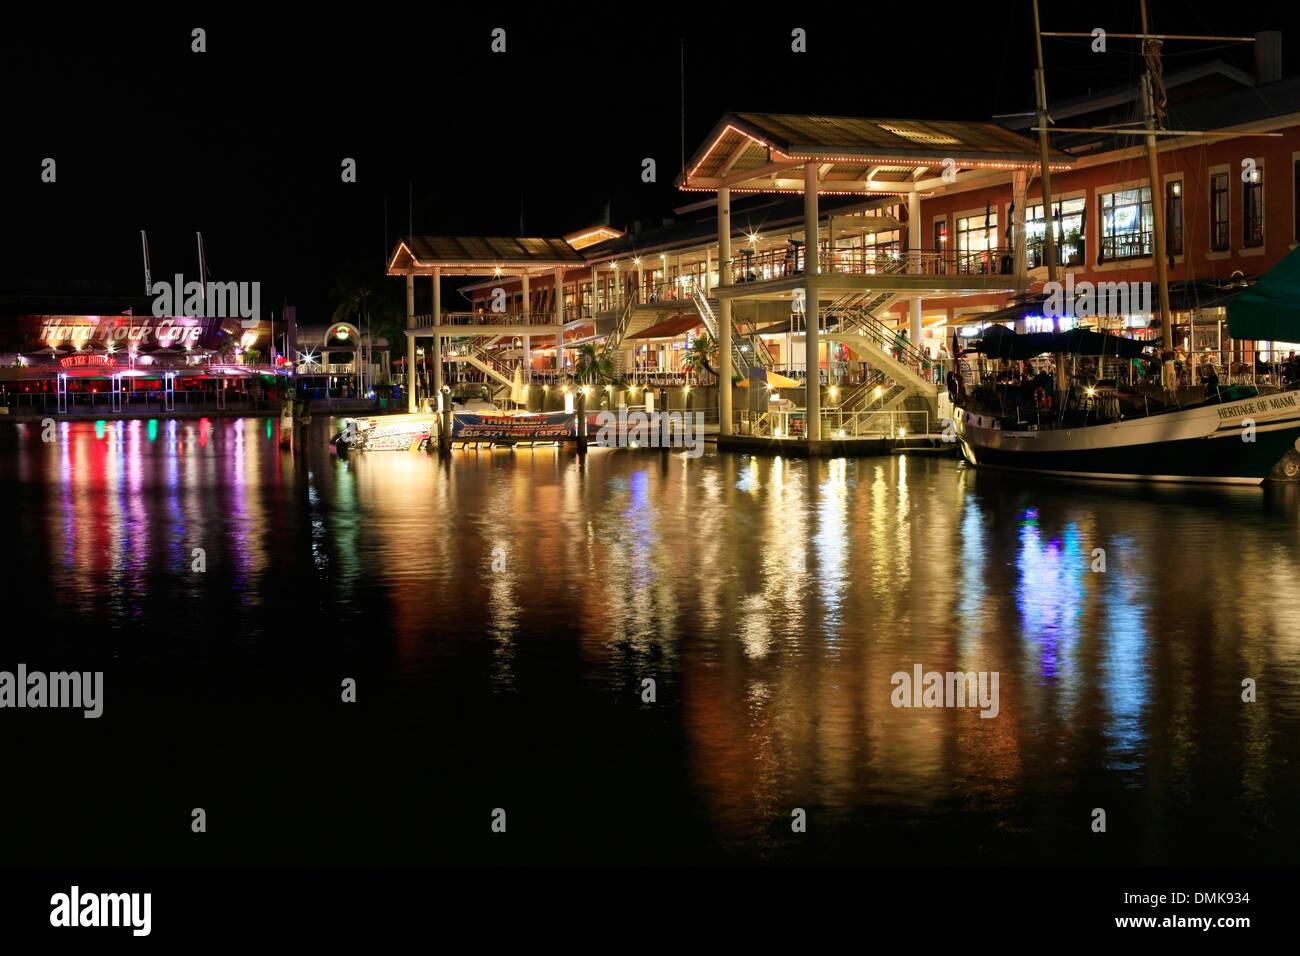 MIAMI, FL - MAY 8: Bayside Marketplace is a festival marketplace in Downtown Miami at night on may 8, 2013, Florida. Stock Photo